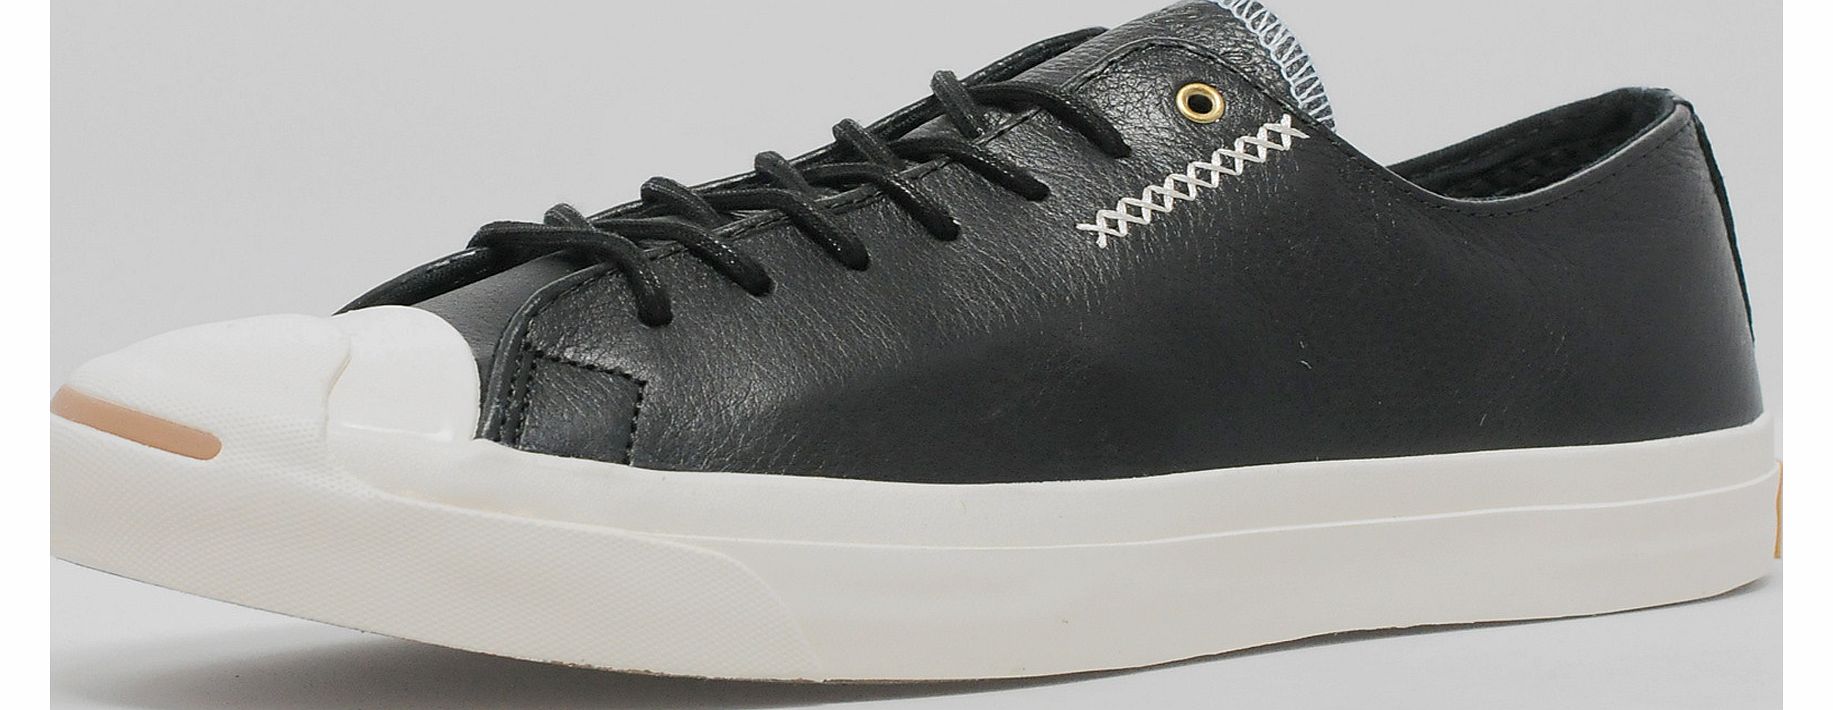 Jack Purcell Cross Stitch Leather